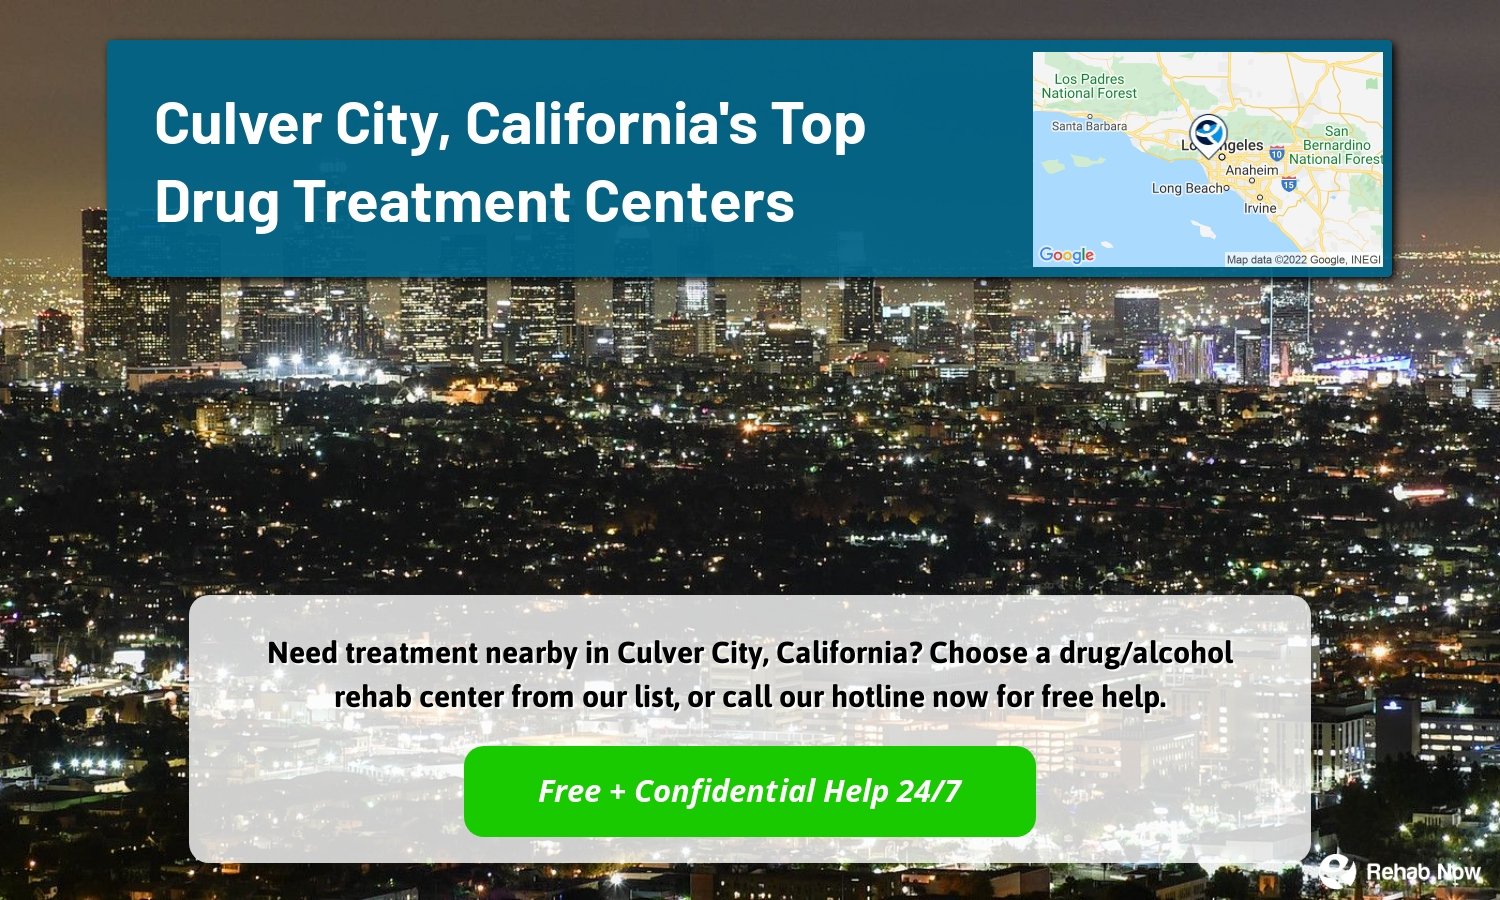 Need treatment nearby in Culver City, California? Choose a drug/alcohol rehab center from our list, or call our hotline now for free help.